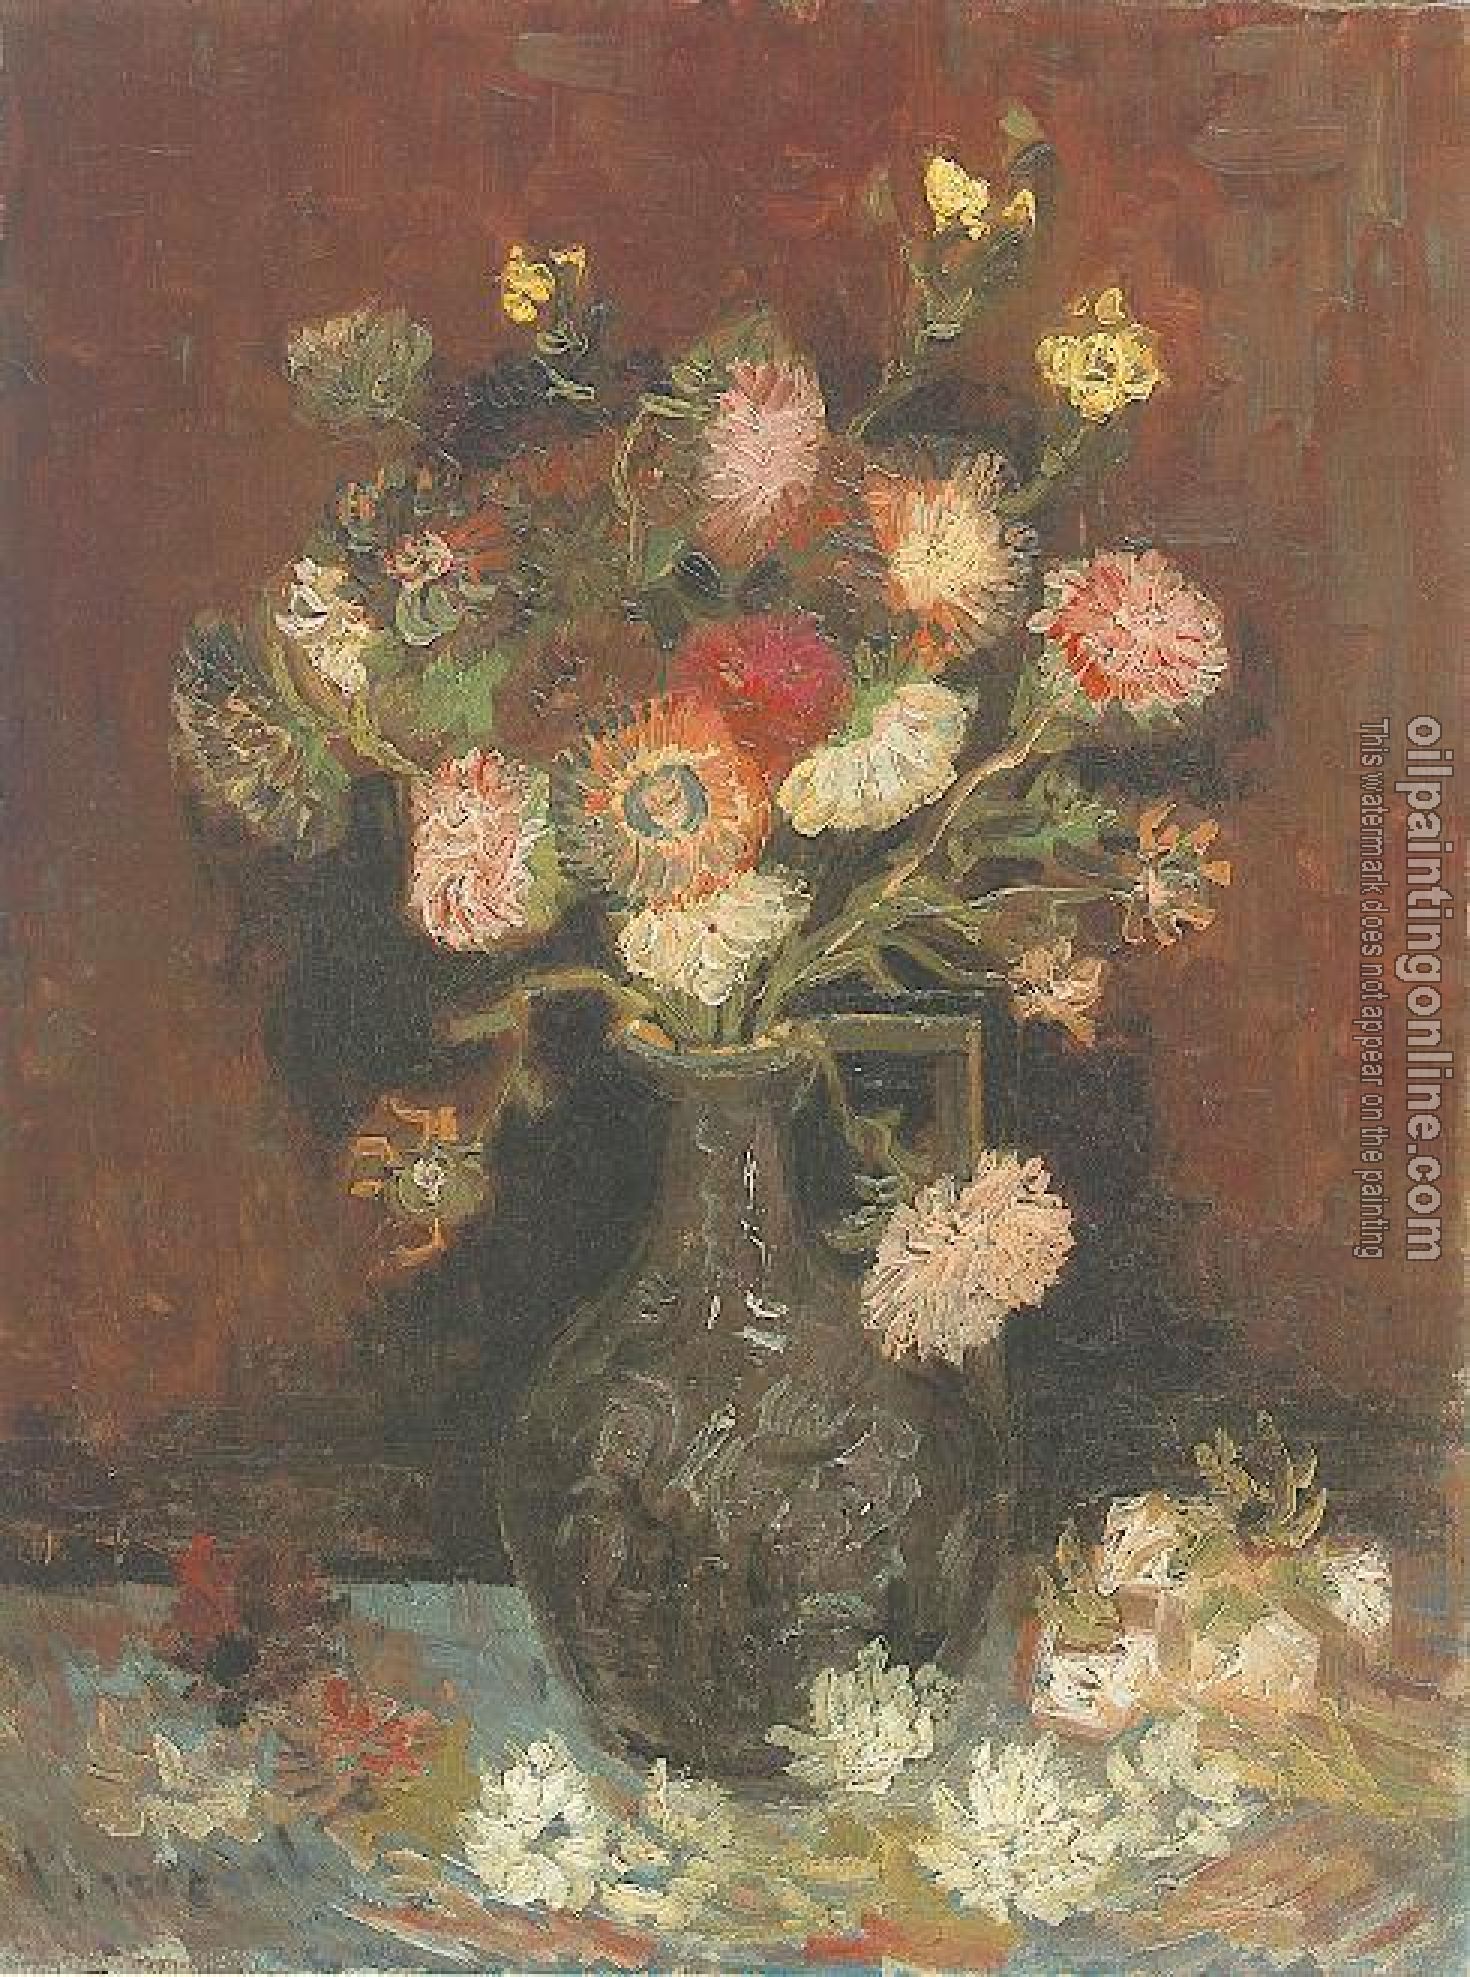 Gogh, Vincent van - Vase with Asters and Phlox